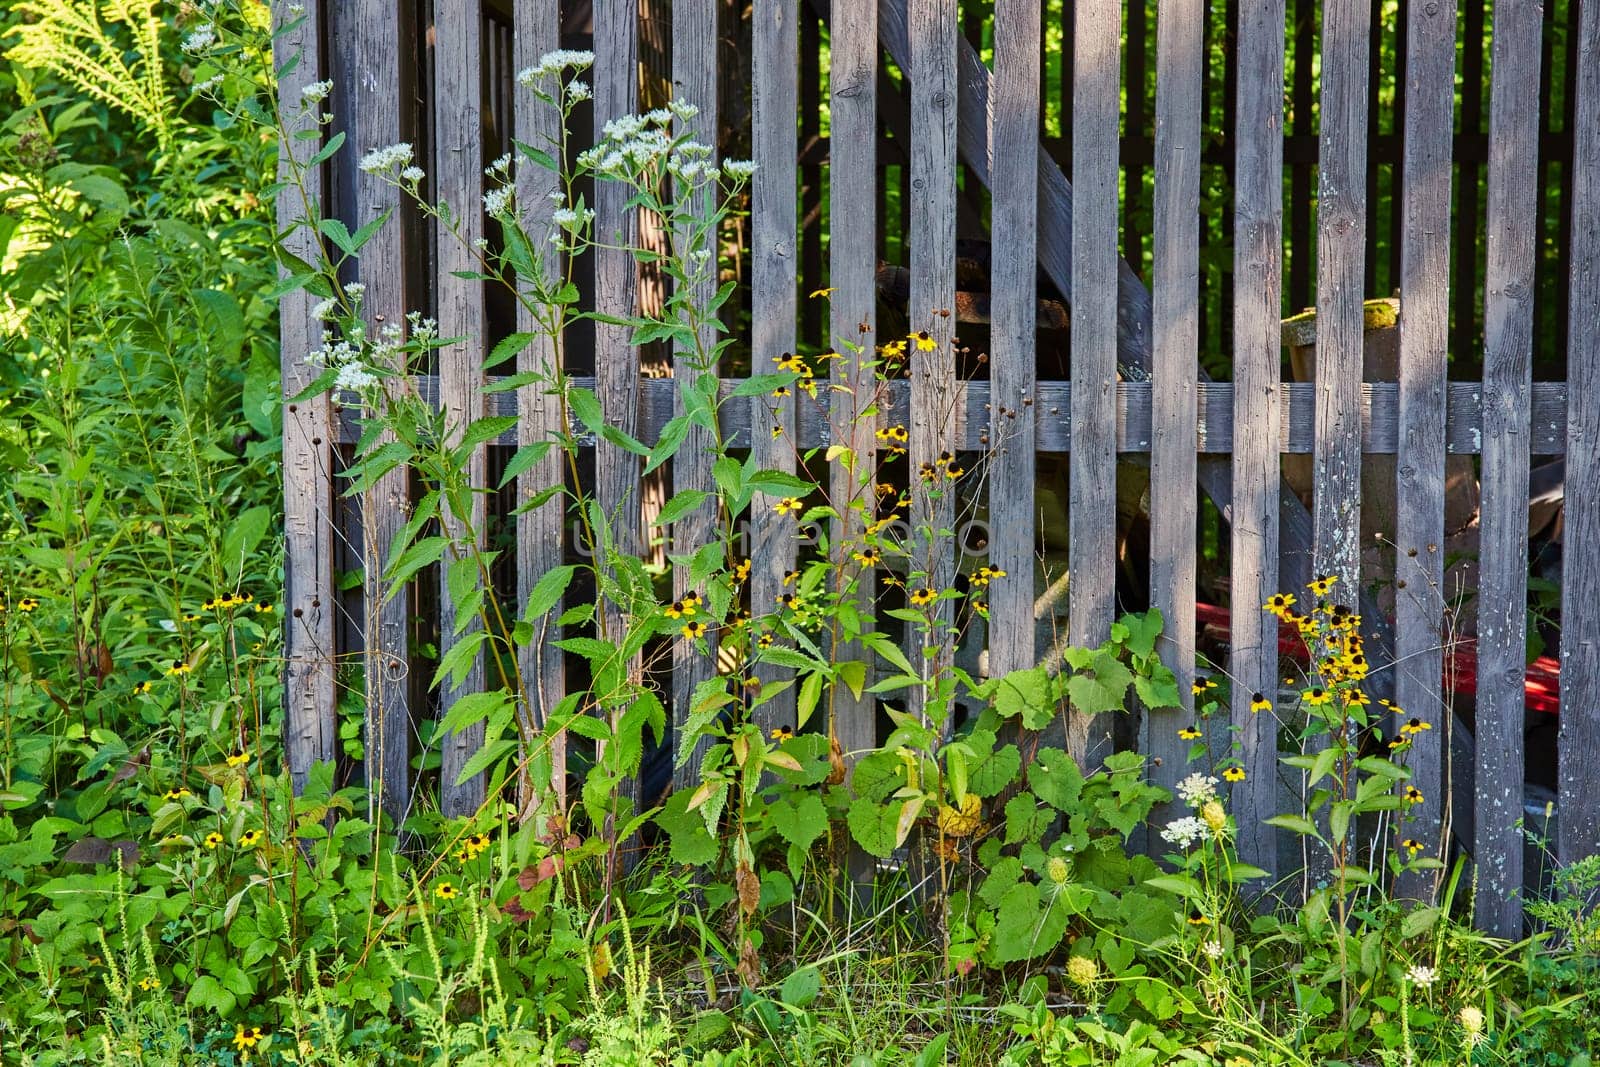 Rustic Wooden Fence with Wildflowers and Ferns in Overgrown Garden by njproductions